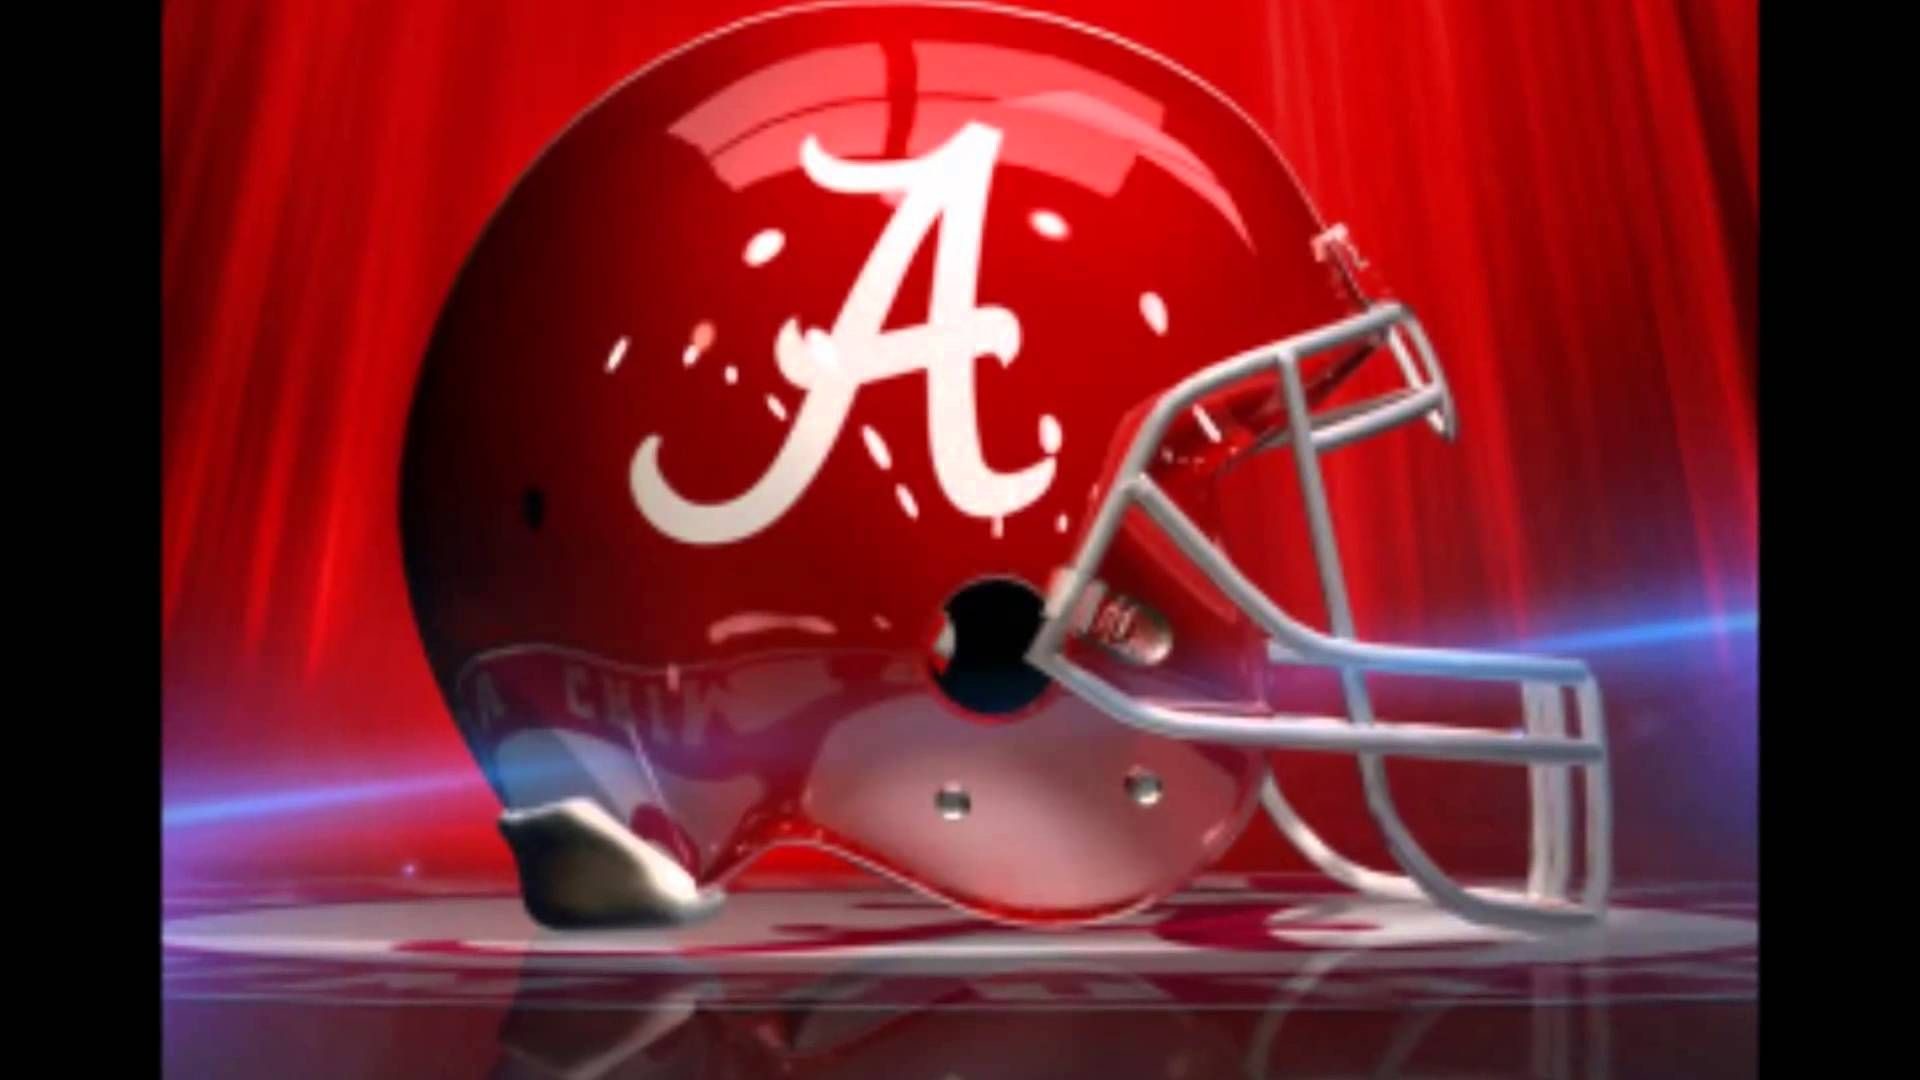 1920x1080 Alabama Football Wallpaper for PC – Full HD Pictures for PC & Mac, Tablet,  Laptop, Mobile